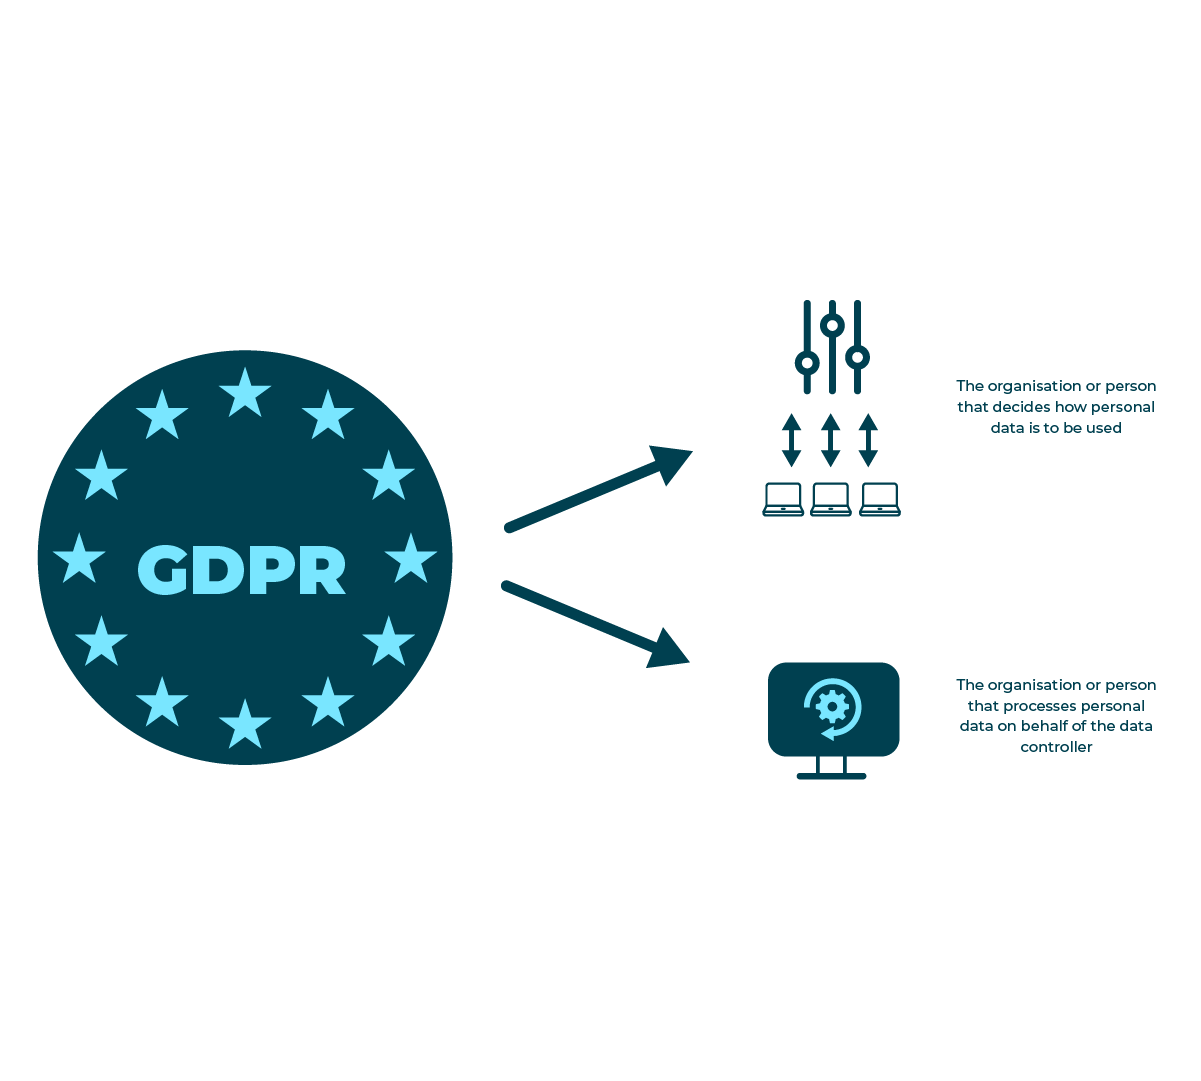 Decorative image: Simple flow diagram showing GDPR with arrows branching off to: 1. The organisation or person that decides how personal data is to be used; 2. The organisation or person that processes personal data on behalf of the data controller